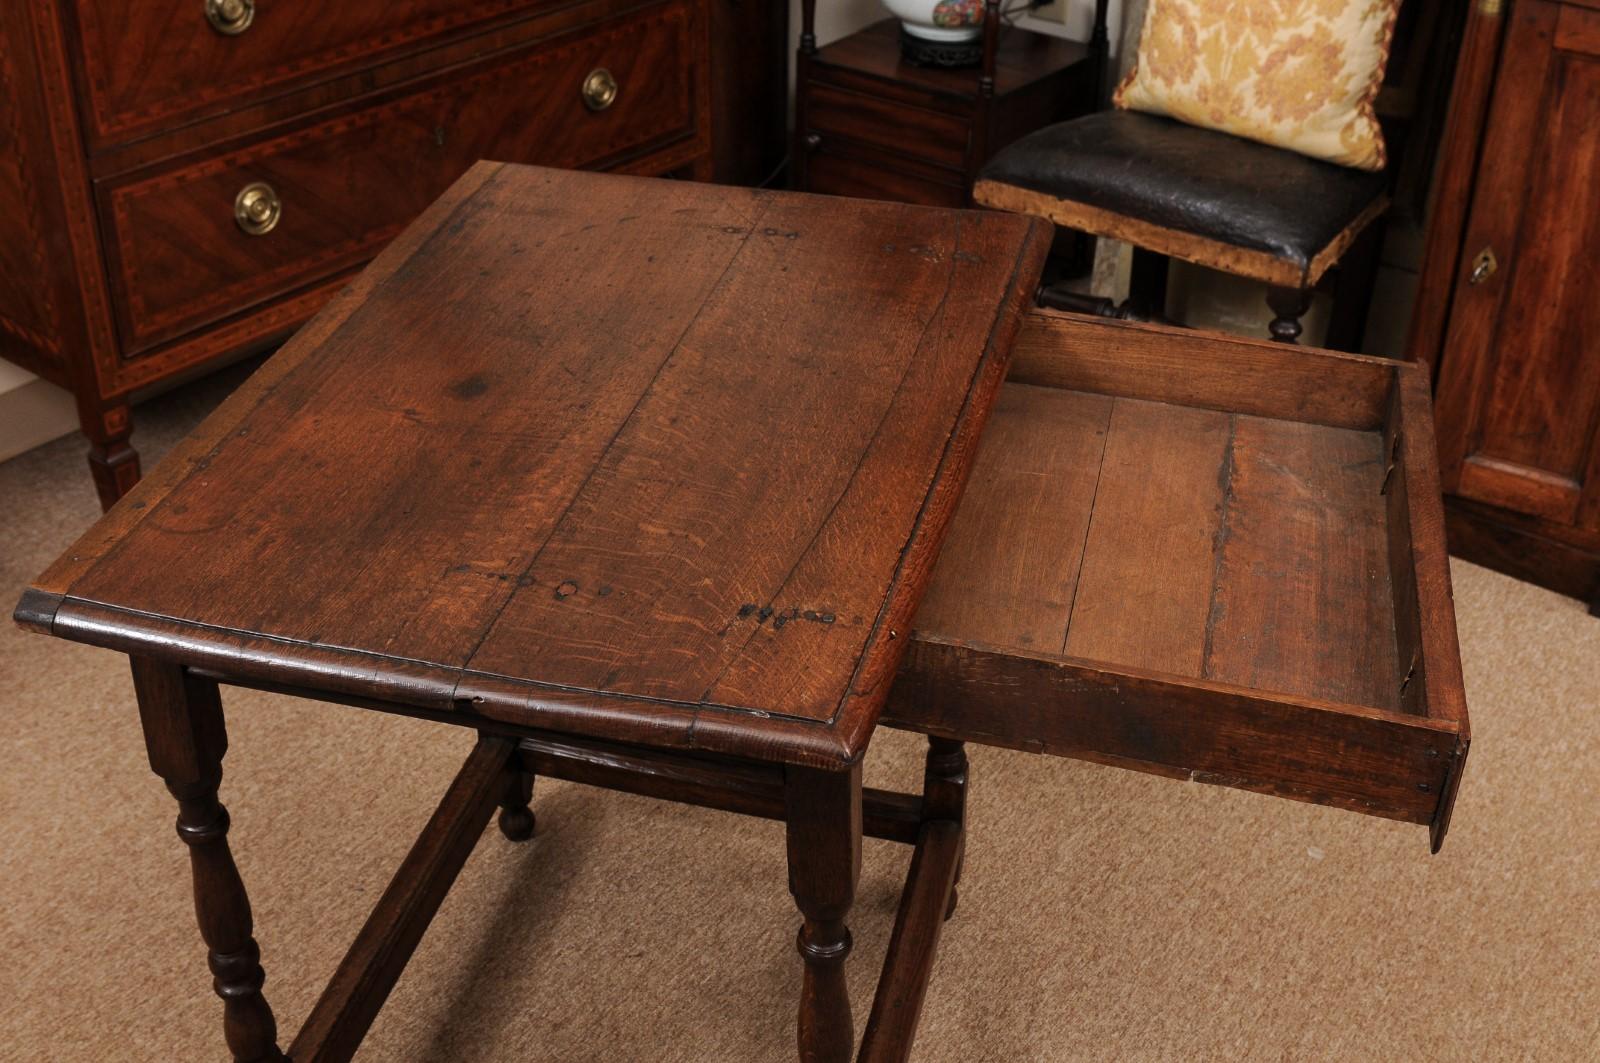 English 18th century Side Table with 1 Drawer, Turned Legs & Box Stretcher 3